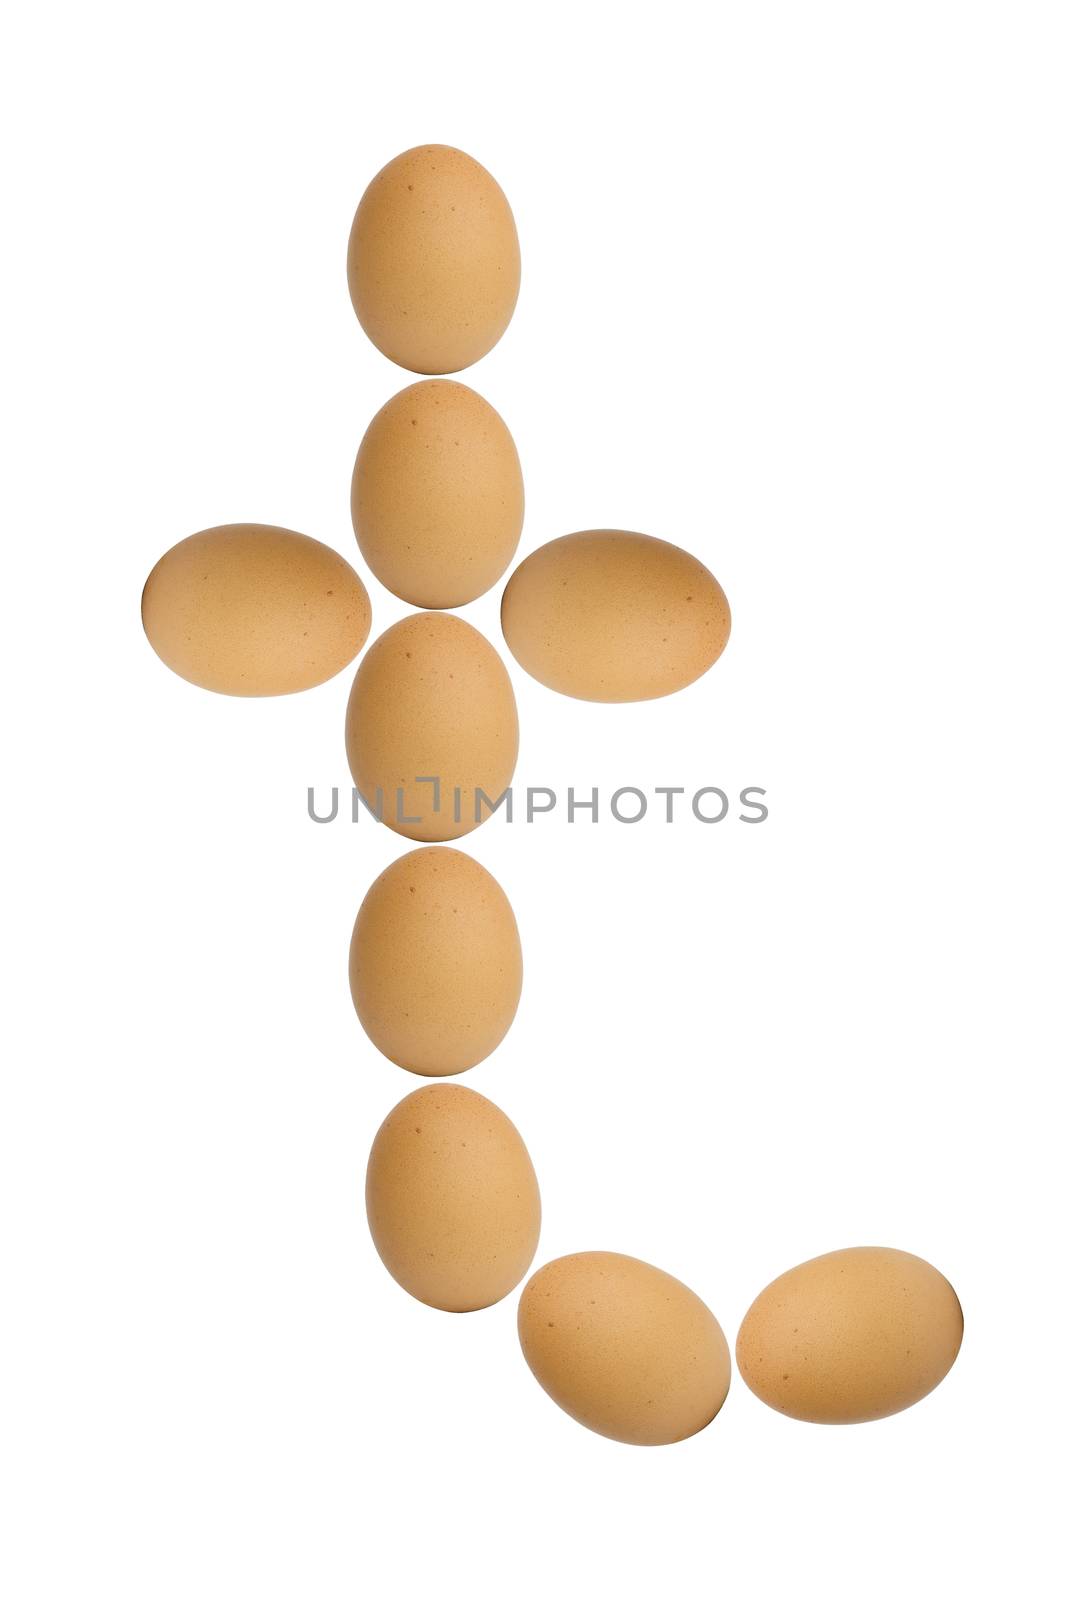 Alphabets  A to Z from brown eggs alphabet isolated on white bac by a3701027